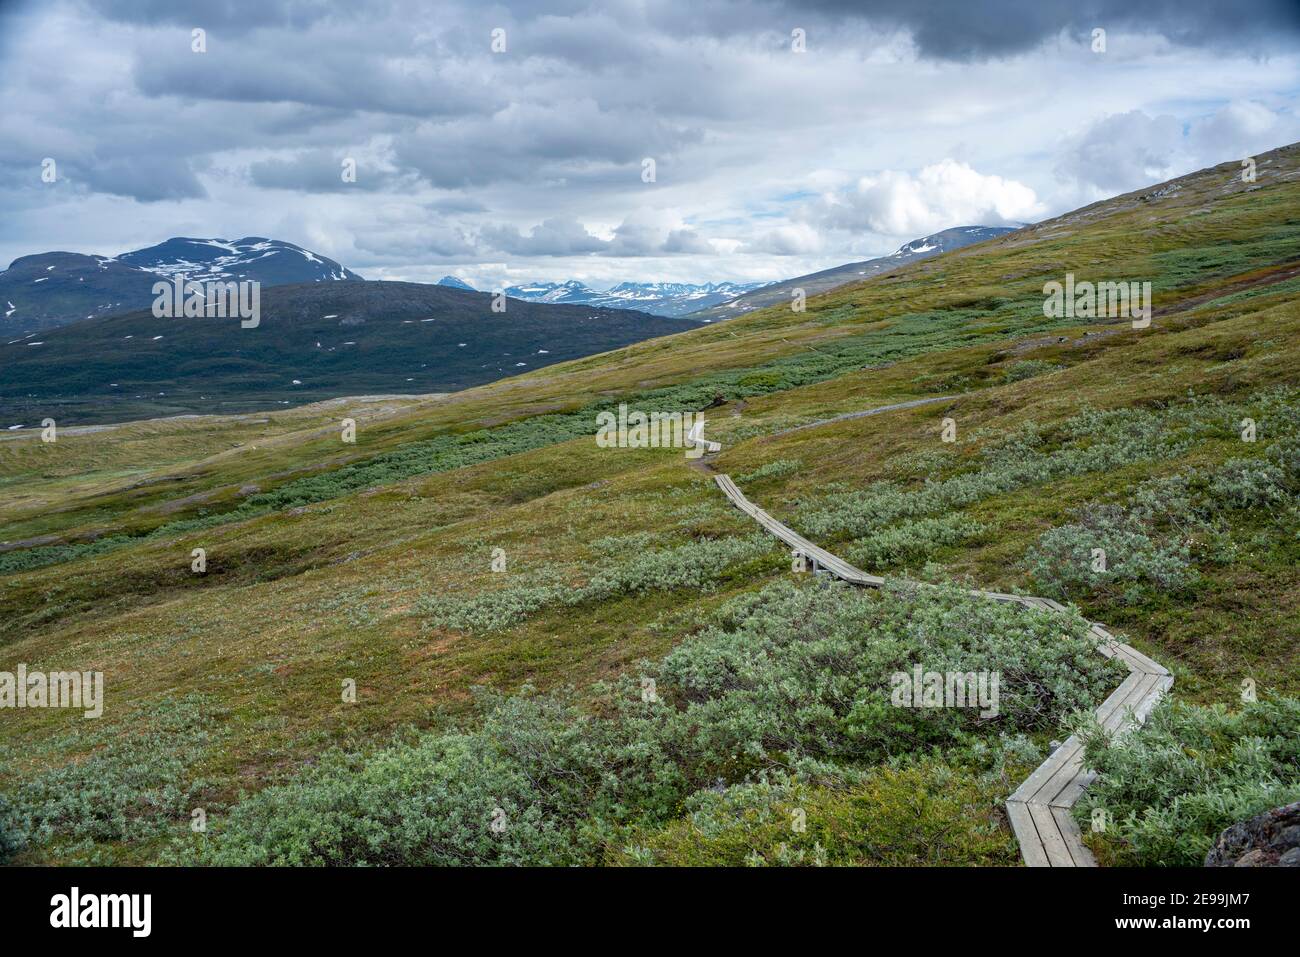 Padjelanta National Park with Wet Hiking Trail leading away from Camera  Stock Photo